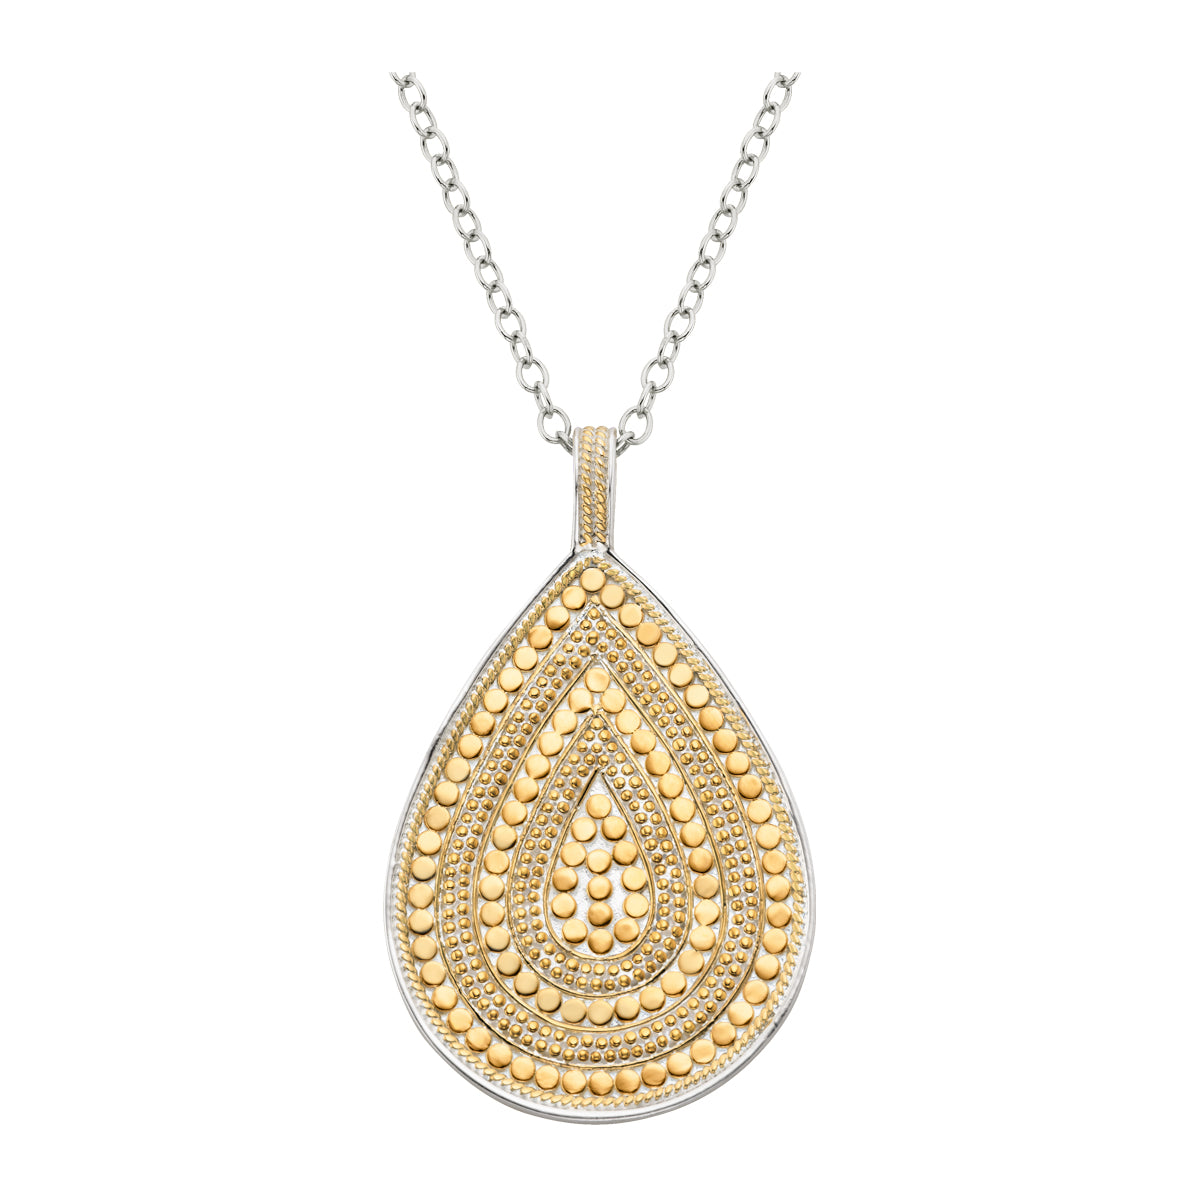 Large teardrop necklace in mixed metals with small gold dots